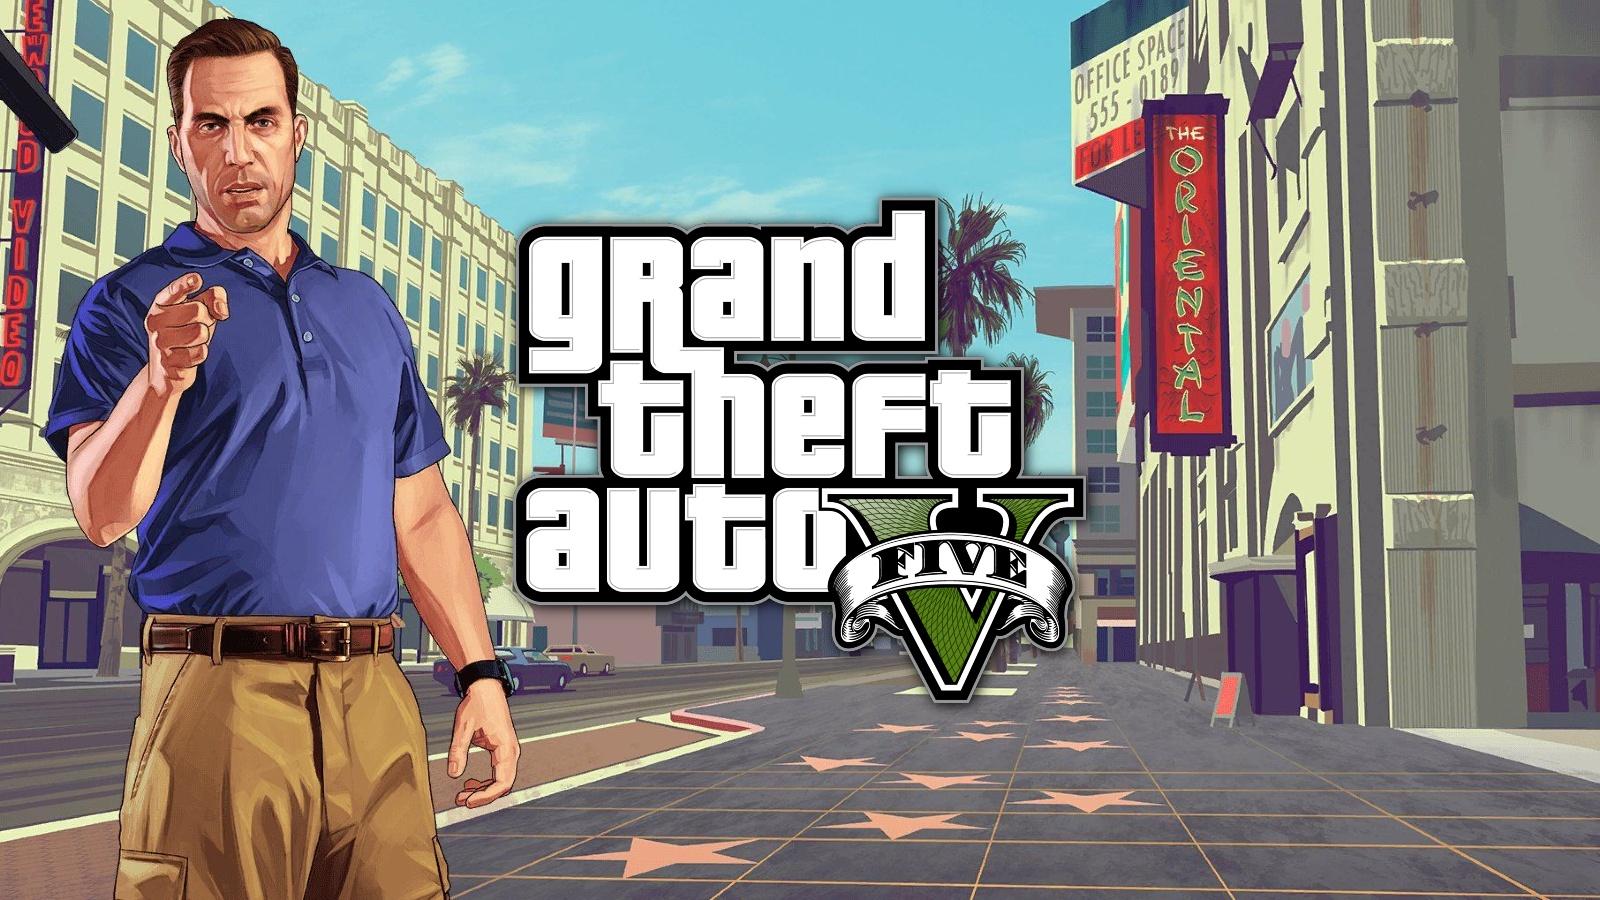 Grand Theft Auto V is free on Epic Games Store